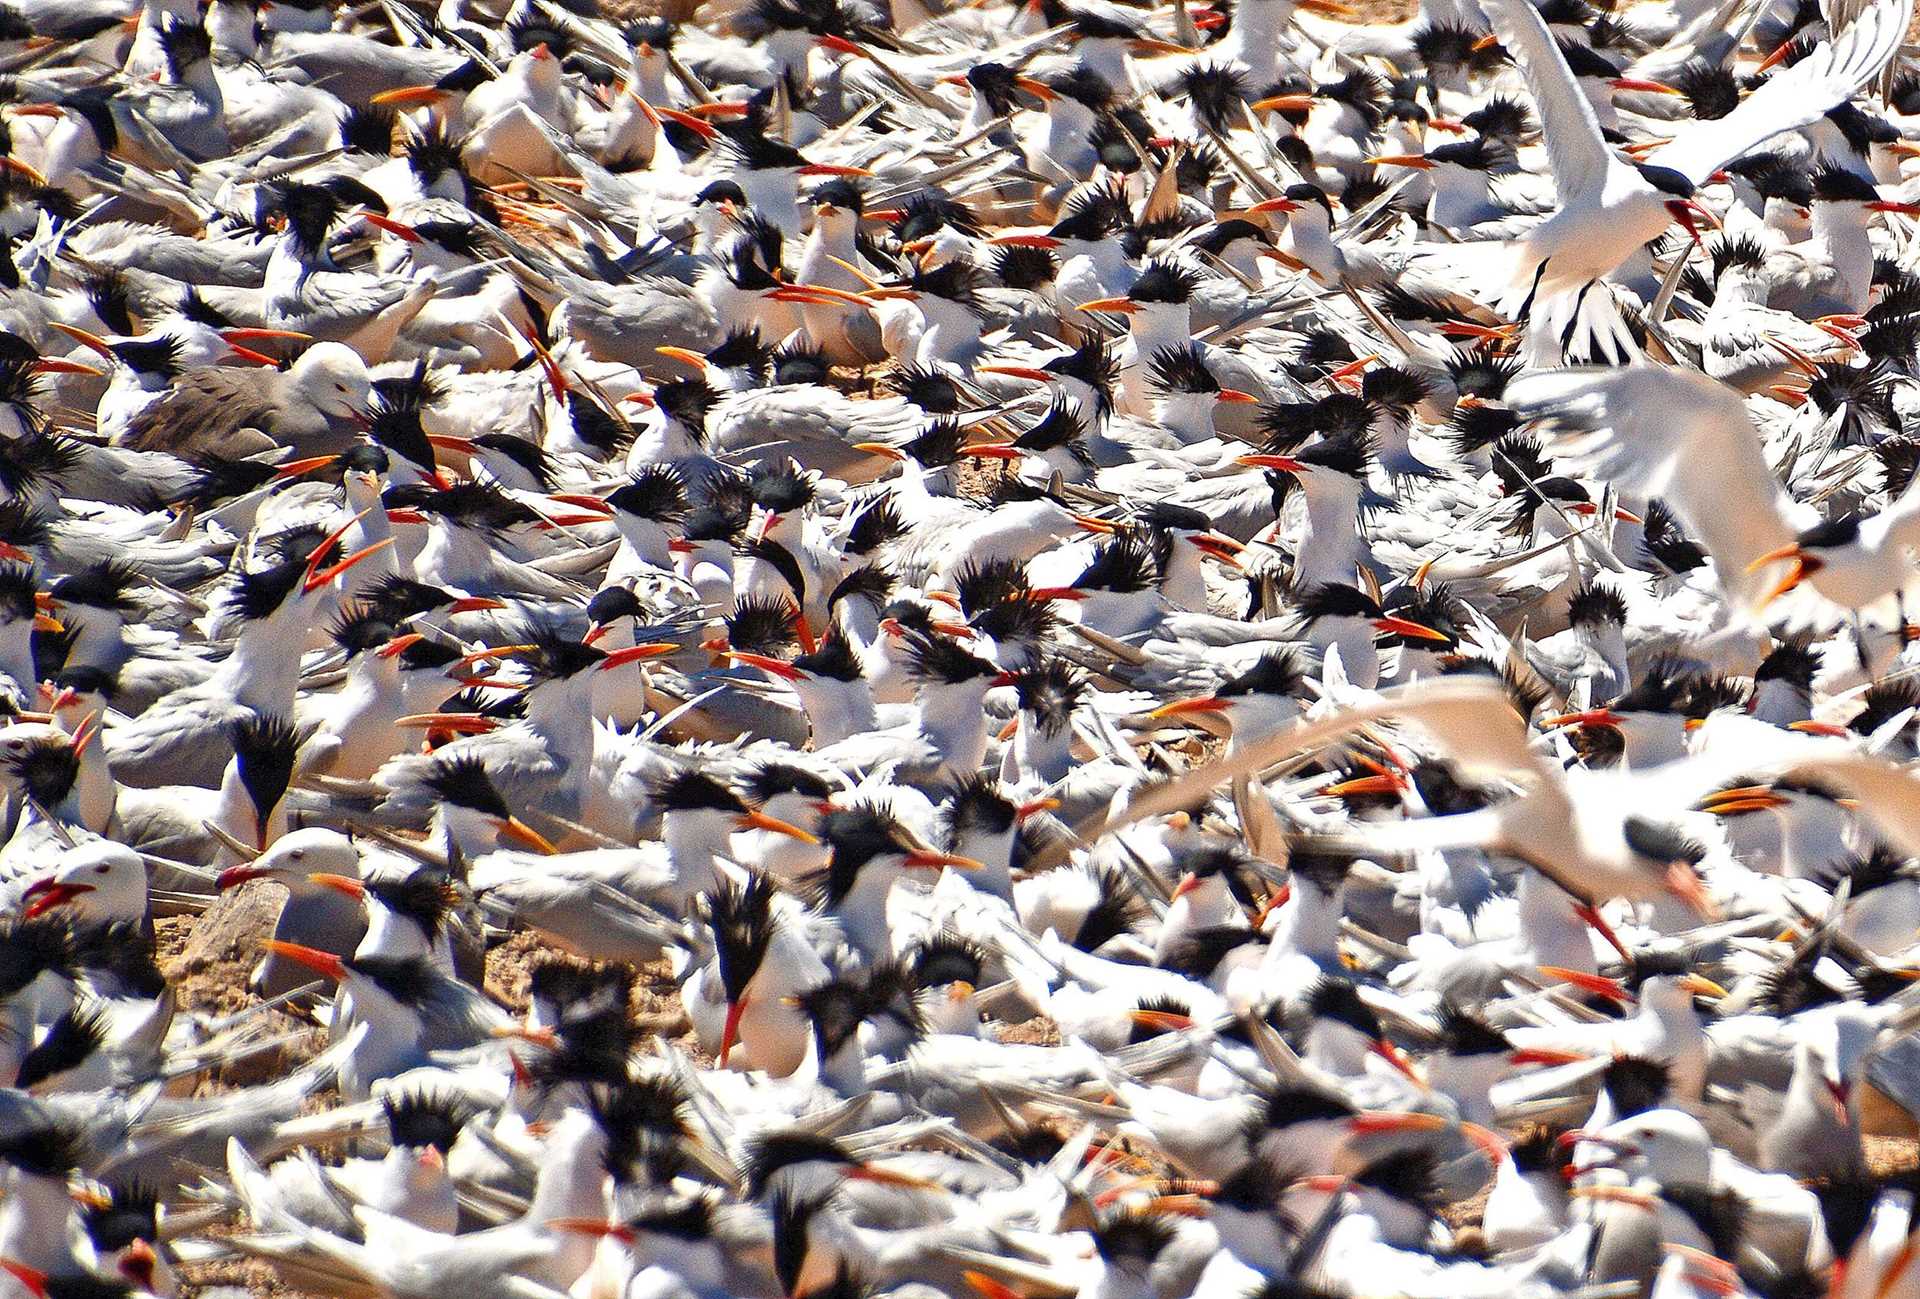 thousands of white birds with orange beaks and feet